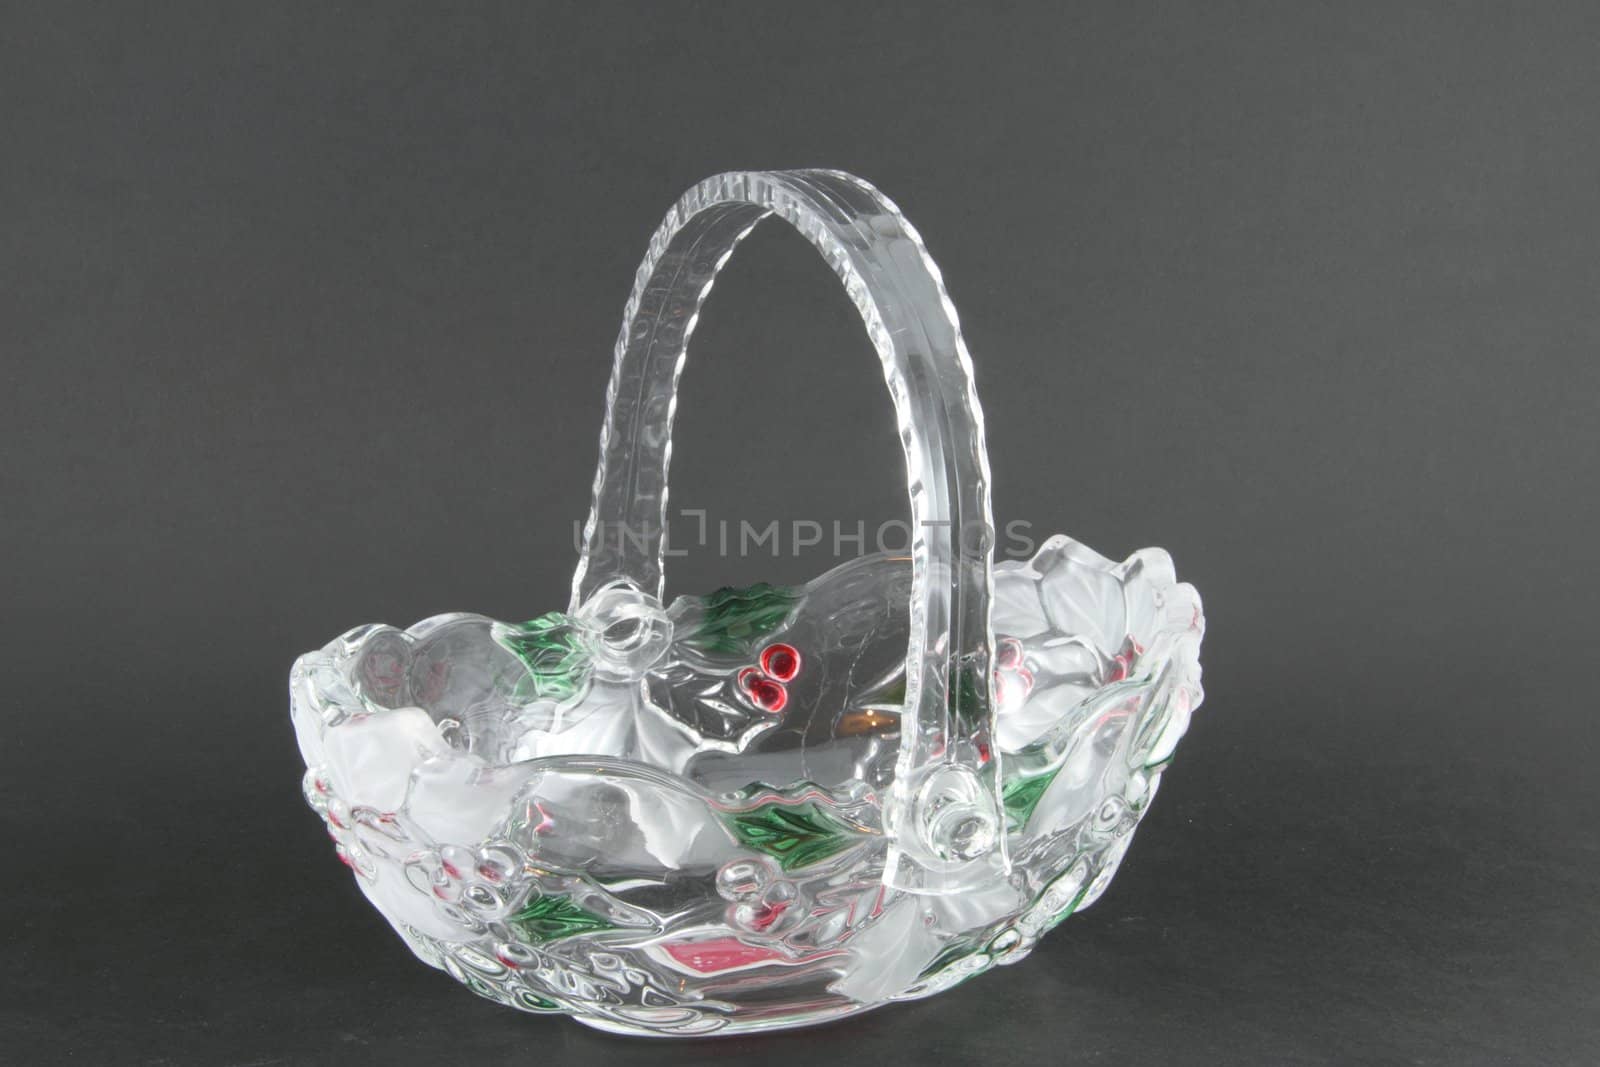 A glass basket with a Christmas theme on a grey background.